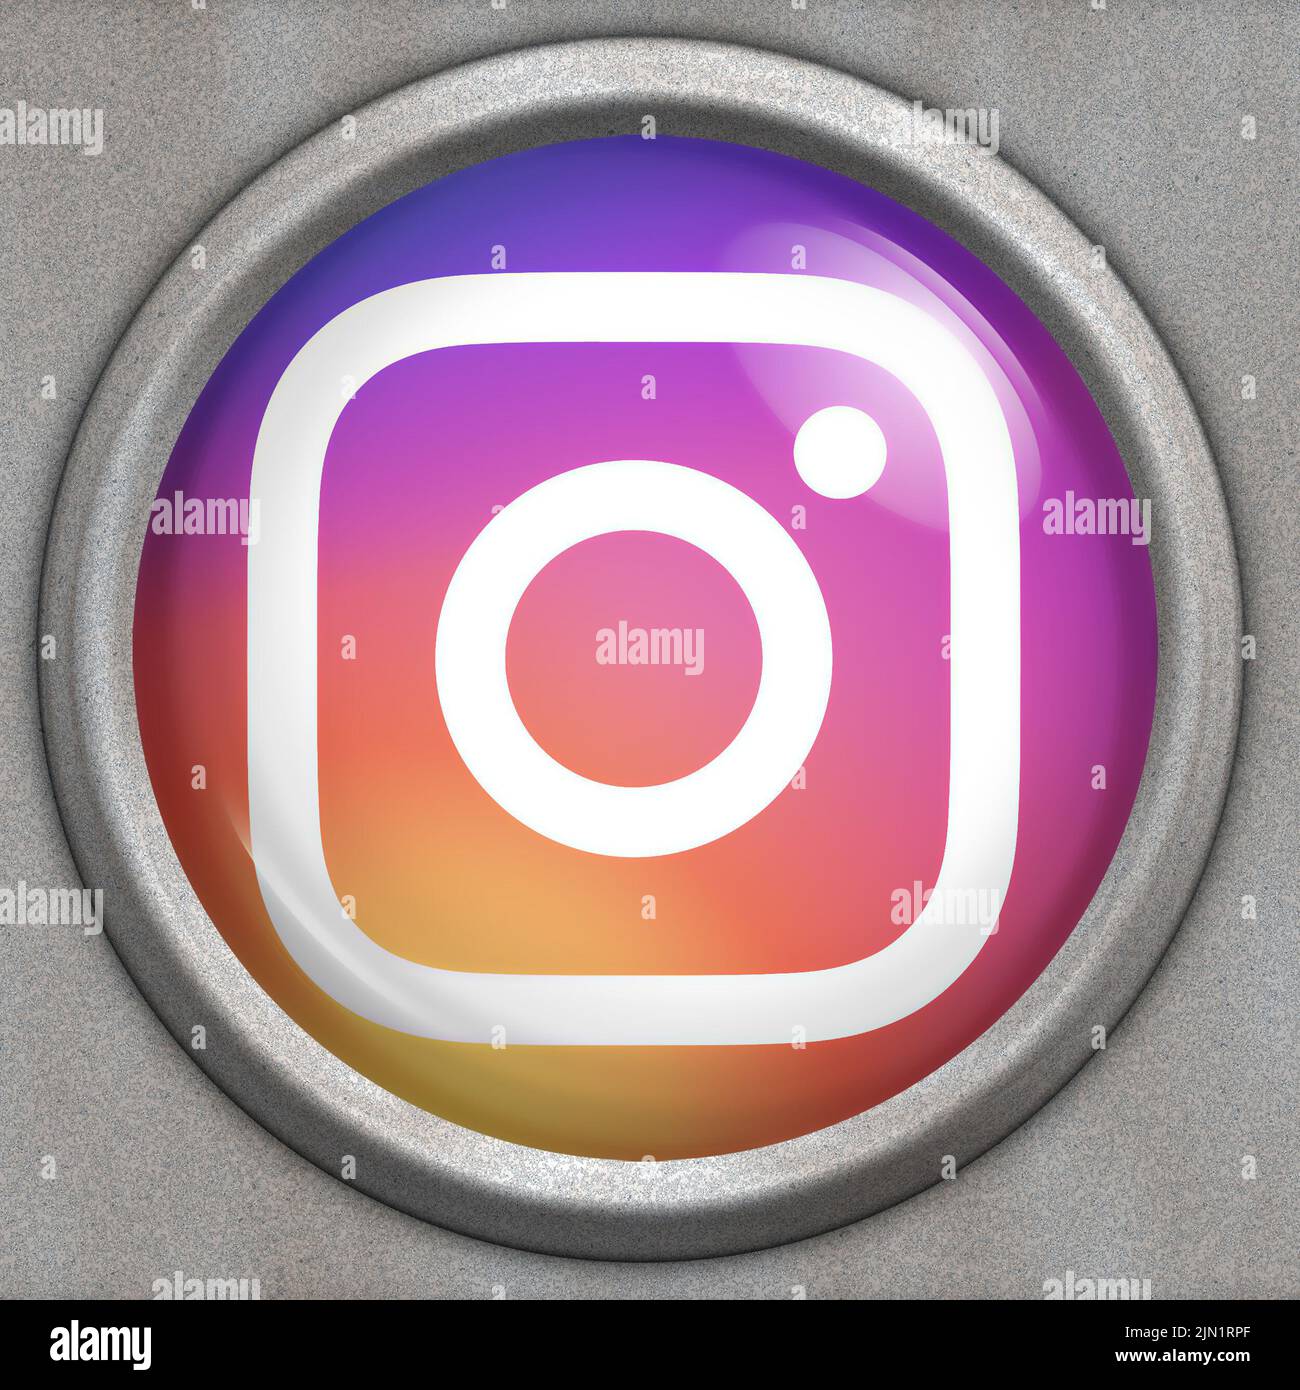 button with logo of social media service Instagram Stock Photo